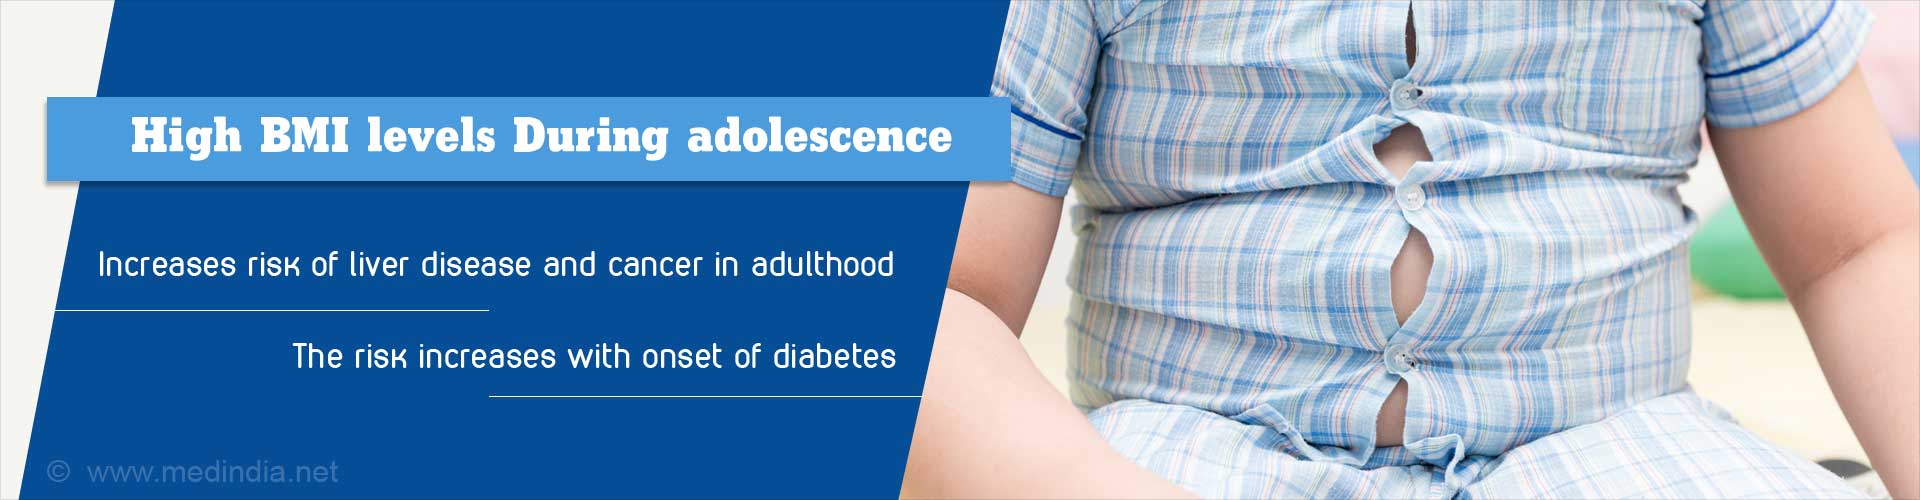 High BMI levels during adolescence
- increases risk of liver disease and cancer in adulthood
- the risk of increases with onset of diabetes
